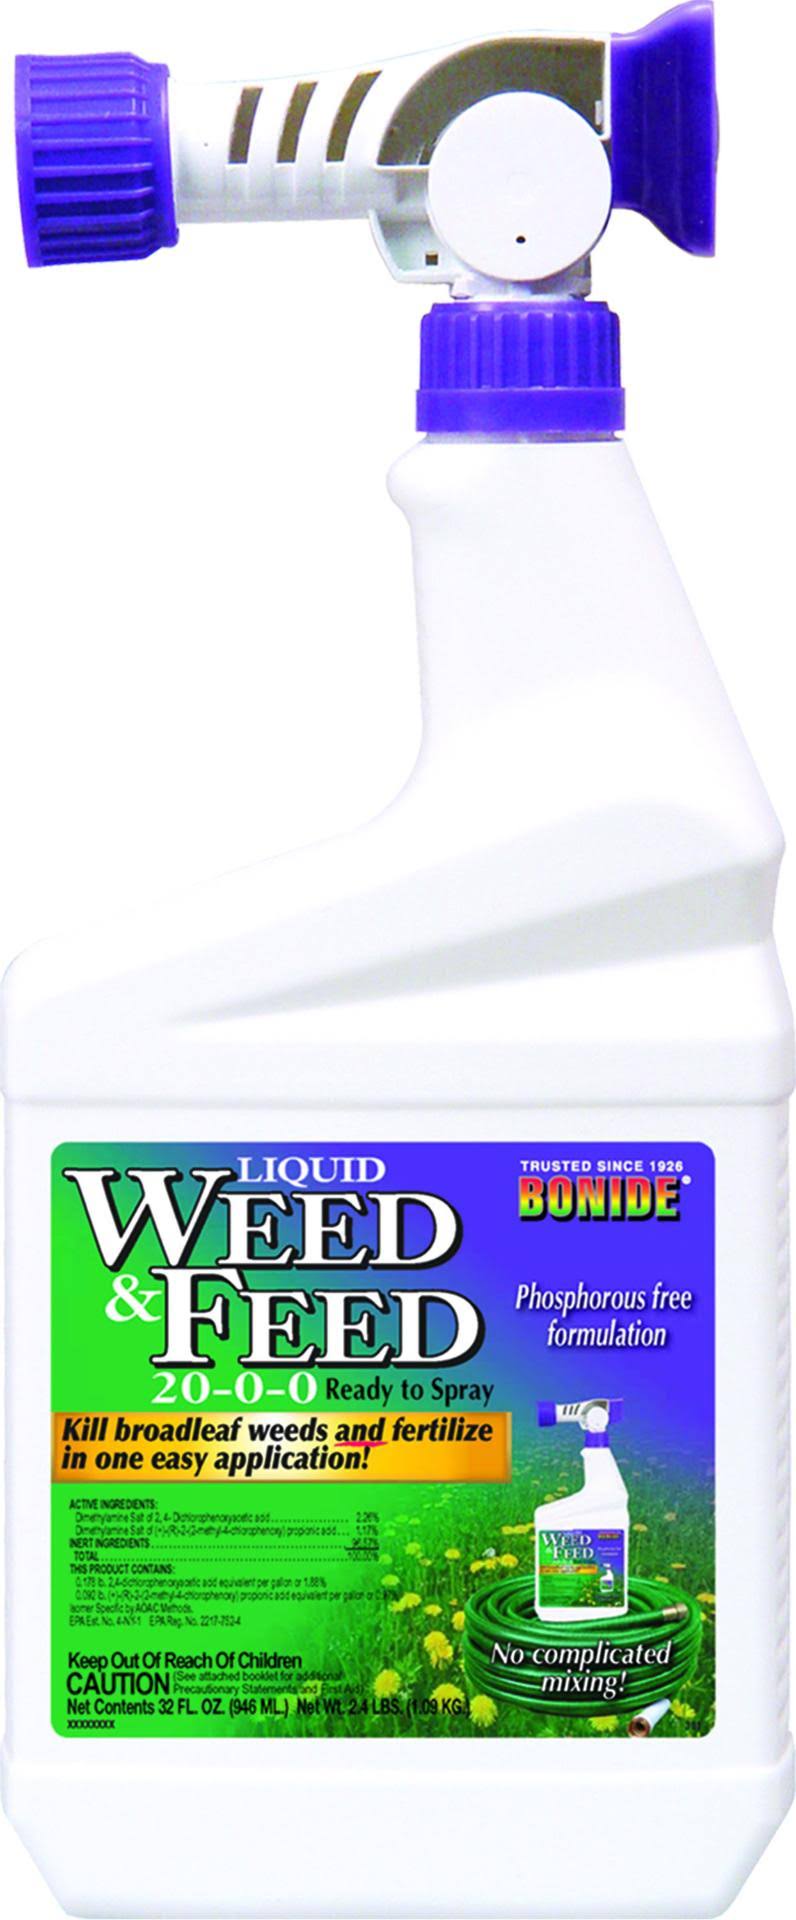 Bonide Chemical RTS Weed and Feed Control - 32oz